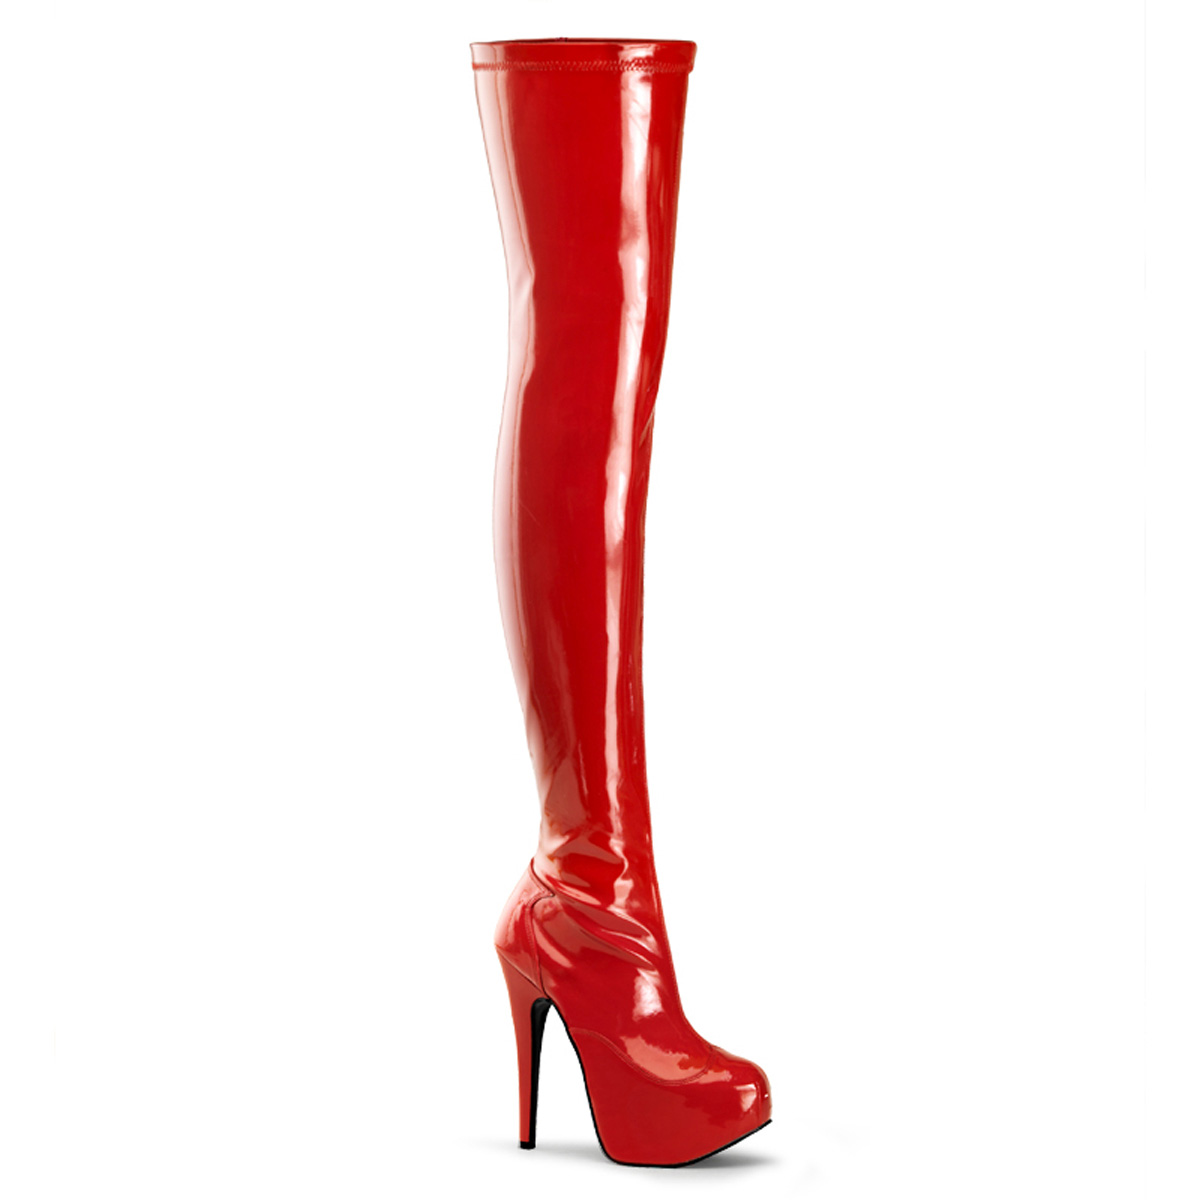 TEEZE-3000 Bordello high heels thigh boot red stretch patent concealed ...